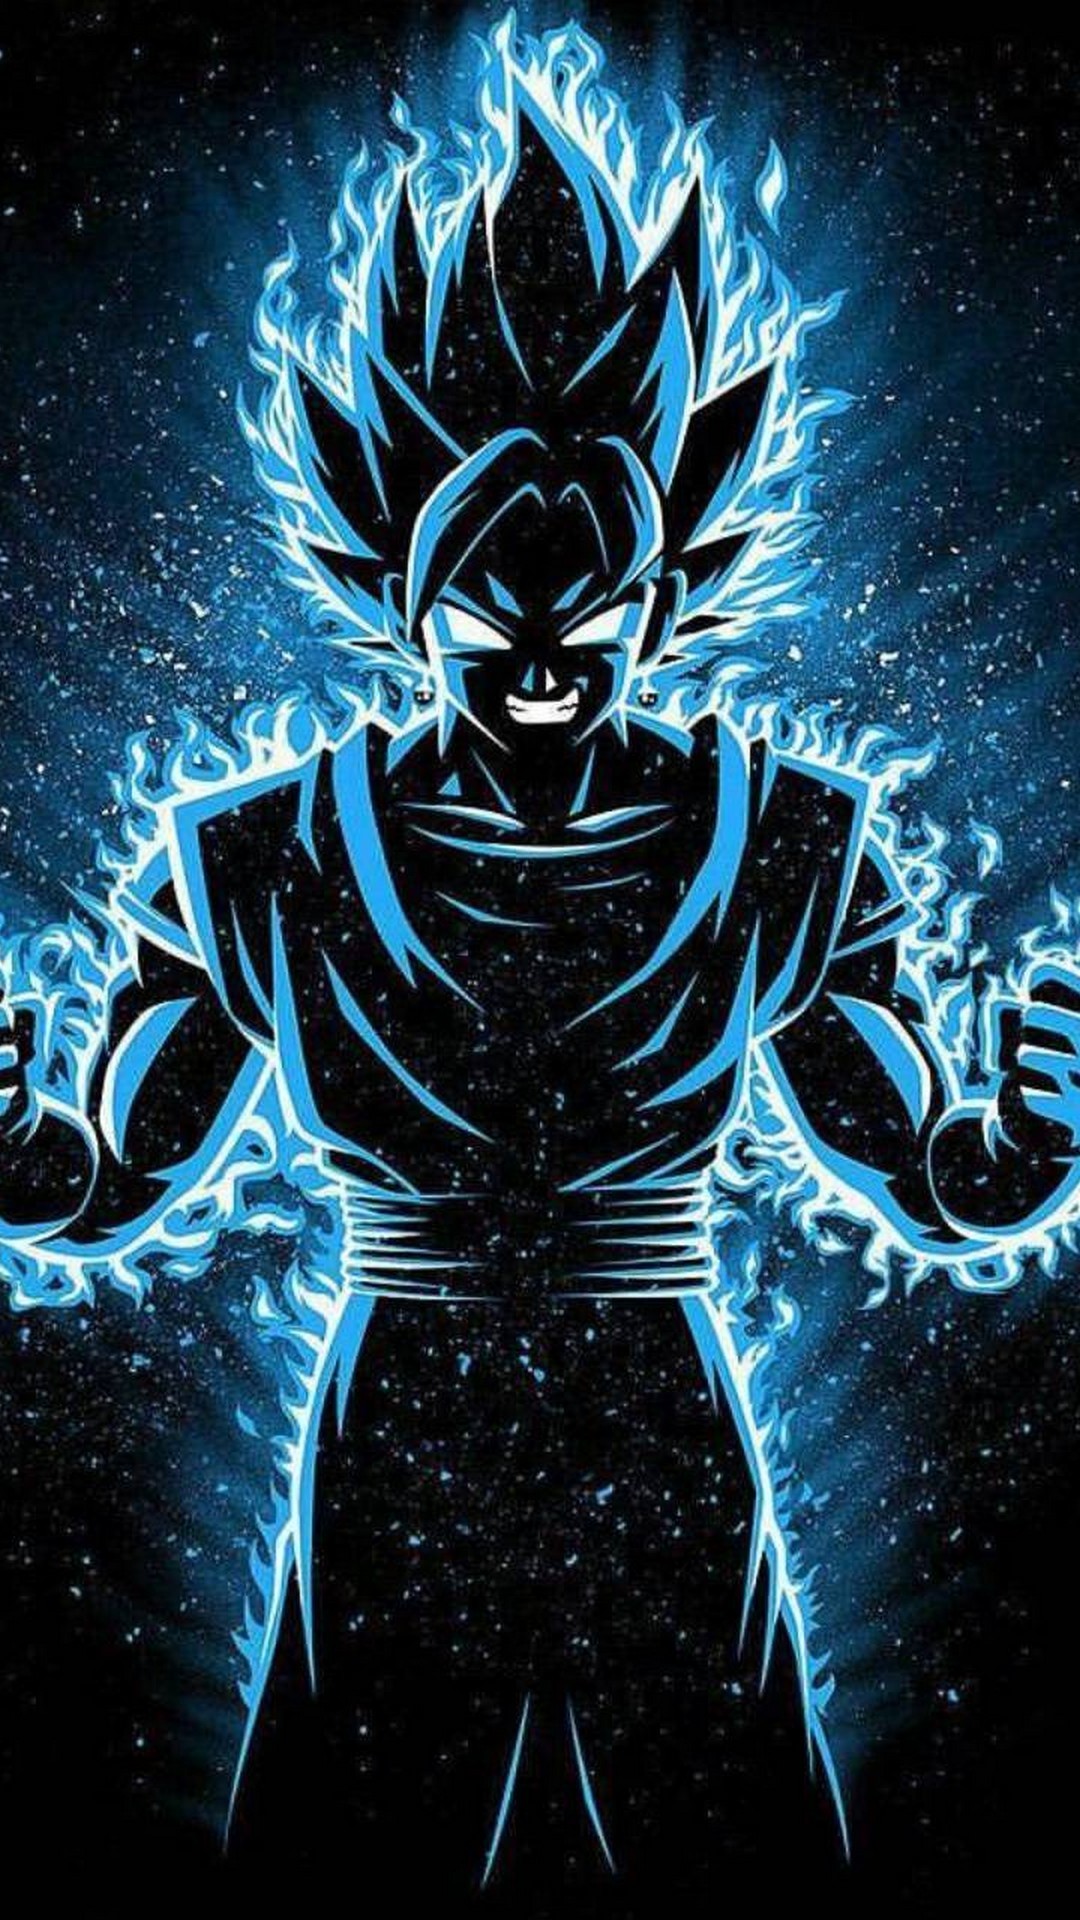 Wallpapers Black Goku with image resolution 1080x1920 pixel. You can make this wallpaper for your iPhone 5, 6, 7, 8, X backgrounds, Mobile Screensaver, or iPad Lock Screen